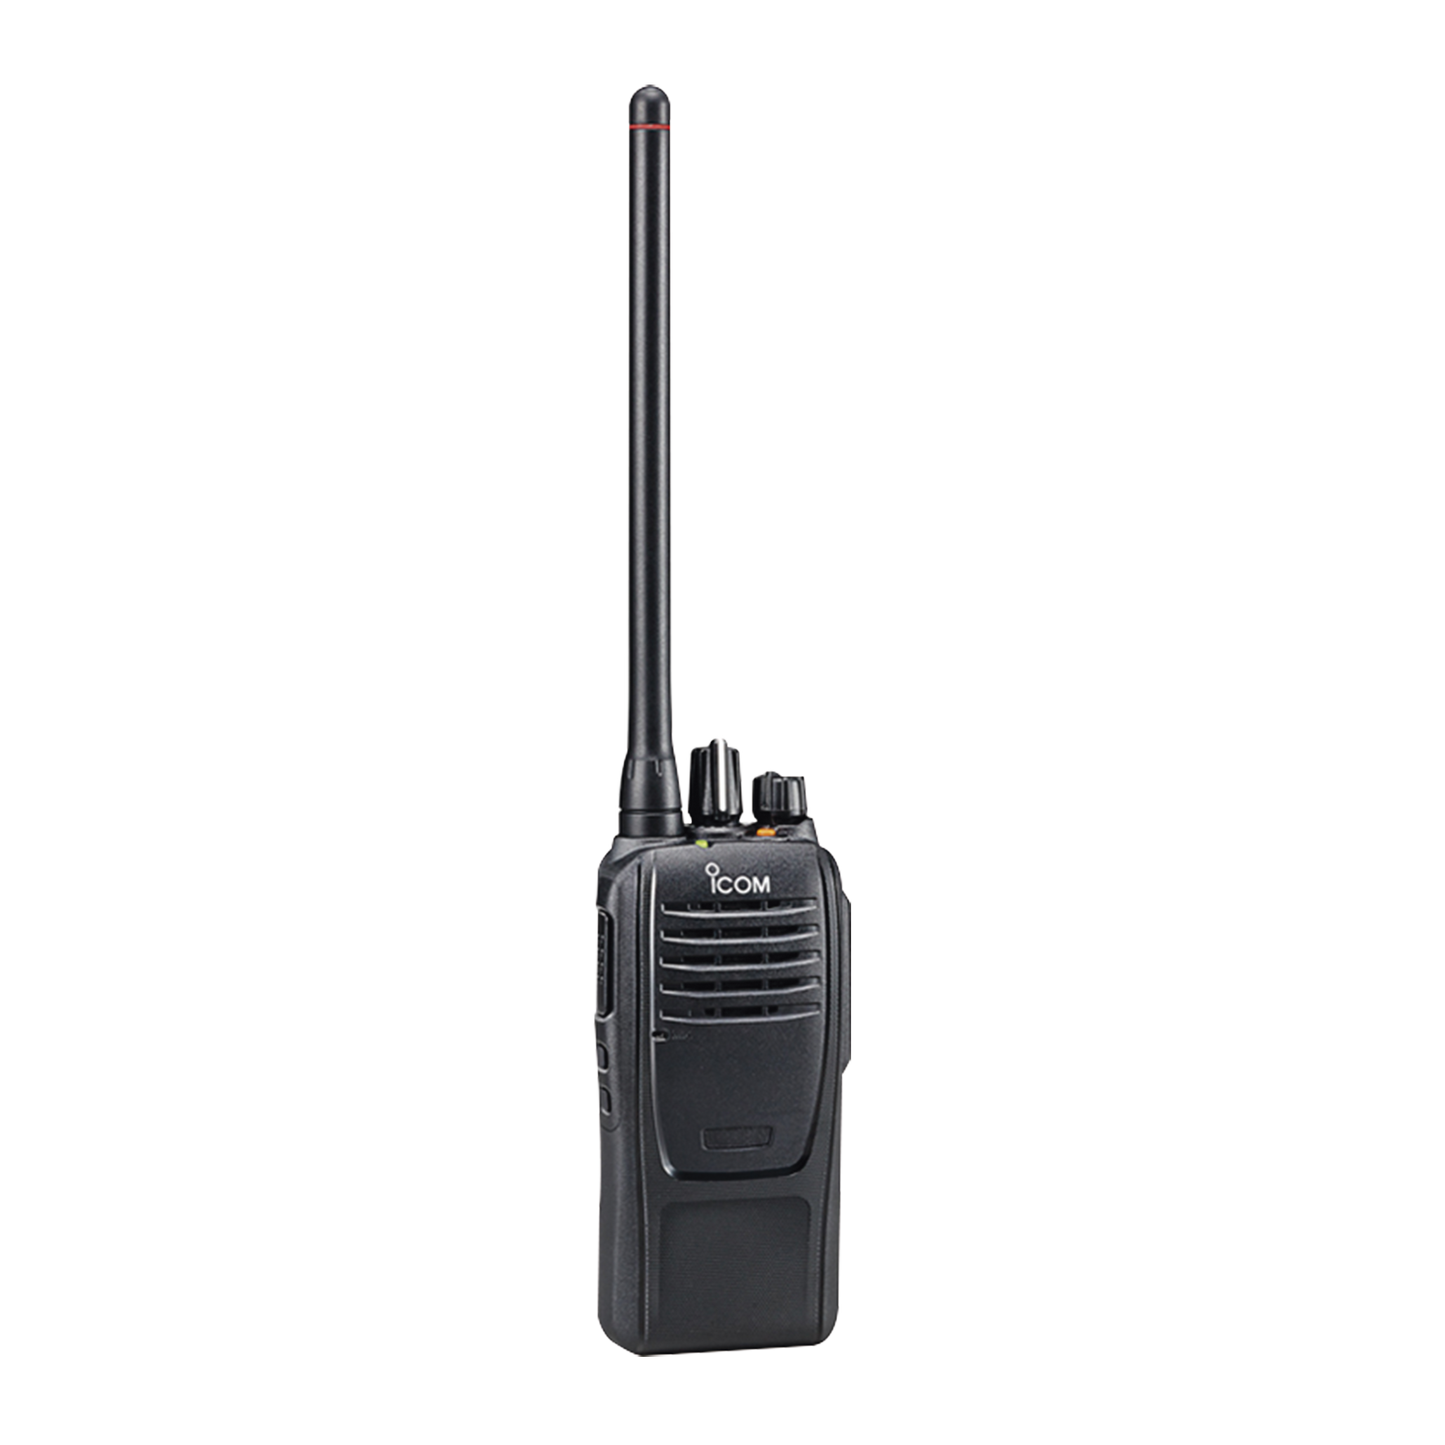 Portable Digital ICOM Transceiver, Rx-Tx: 450- 512  MHz, FCC, type-D Trunking, Submersible IP67